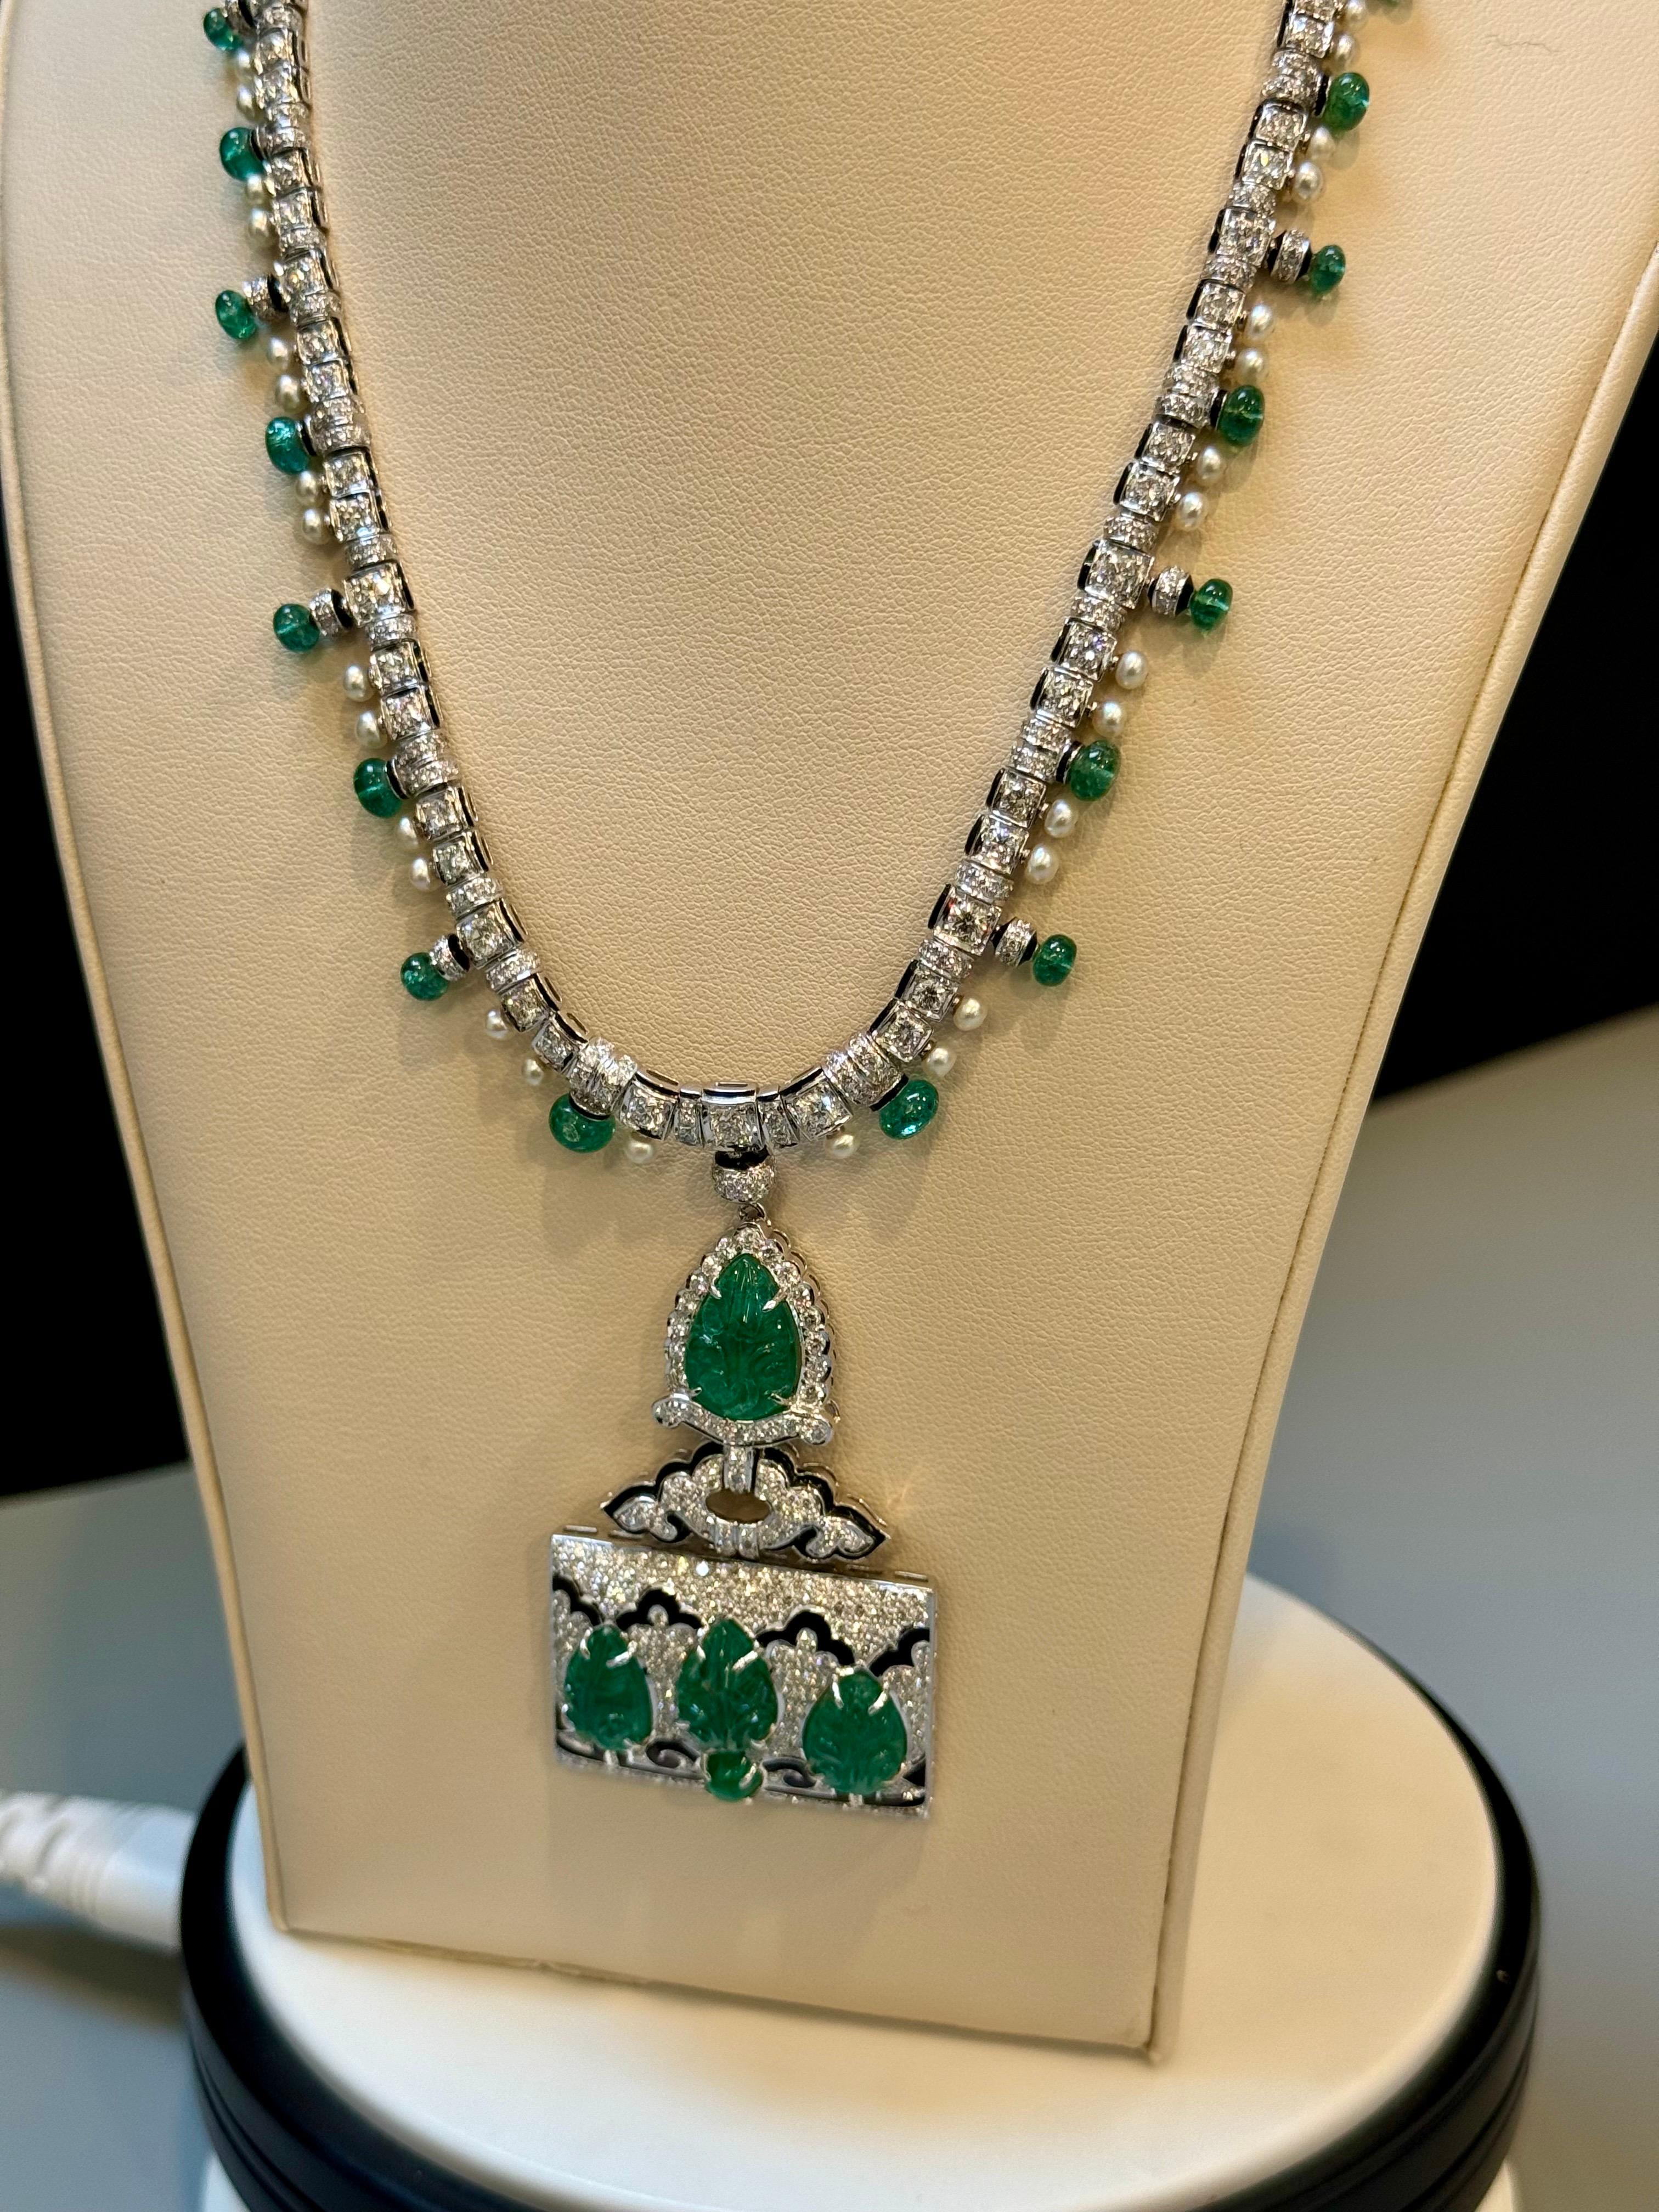 25 Ct Natural Carved Emerald & 10 Ct Diamond Art Deco  18 KW Gold Necklace For Sale 2